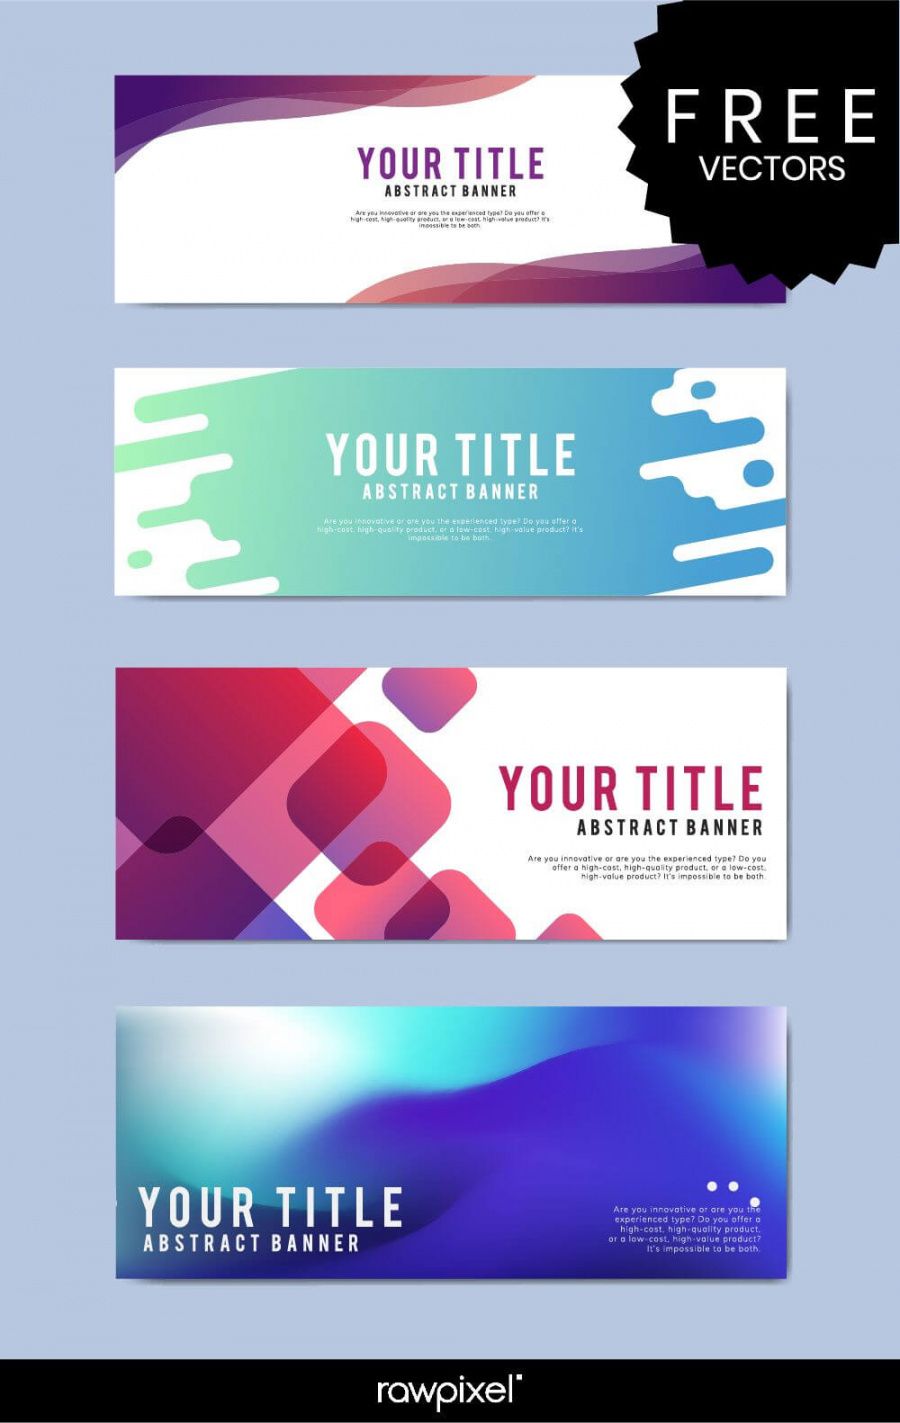 website banner templates free download  professional template examples website banner design template word